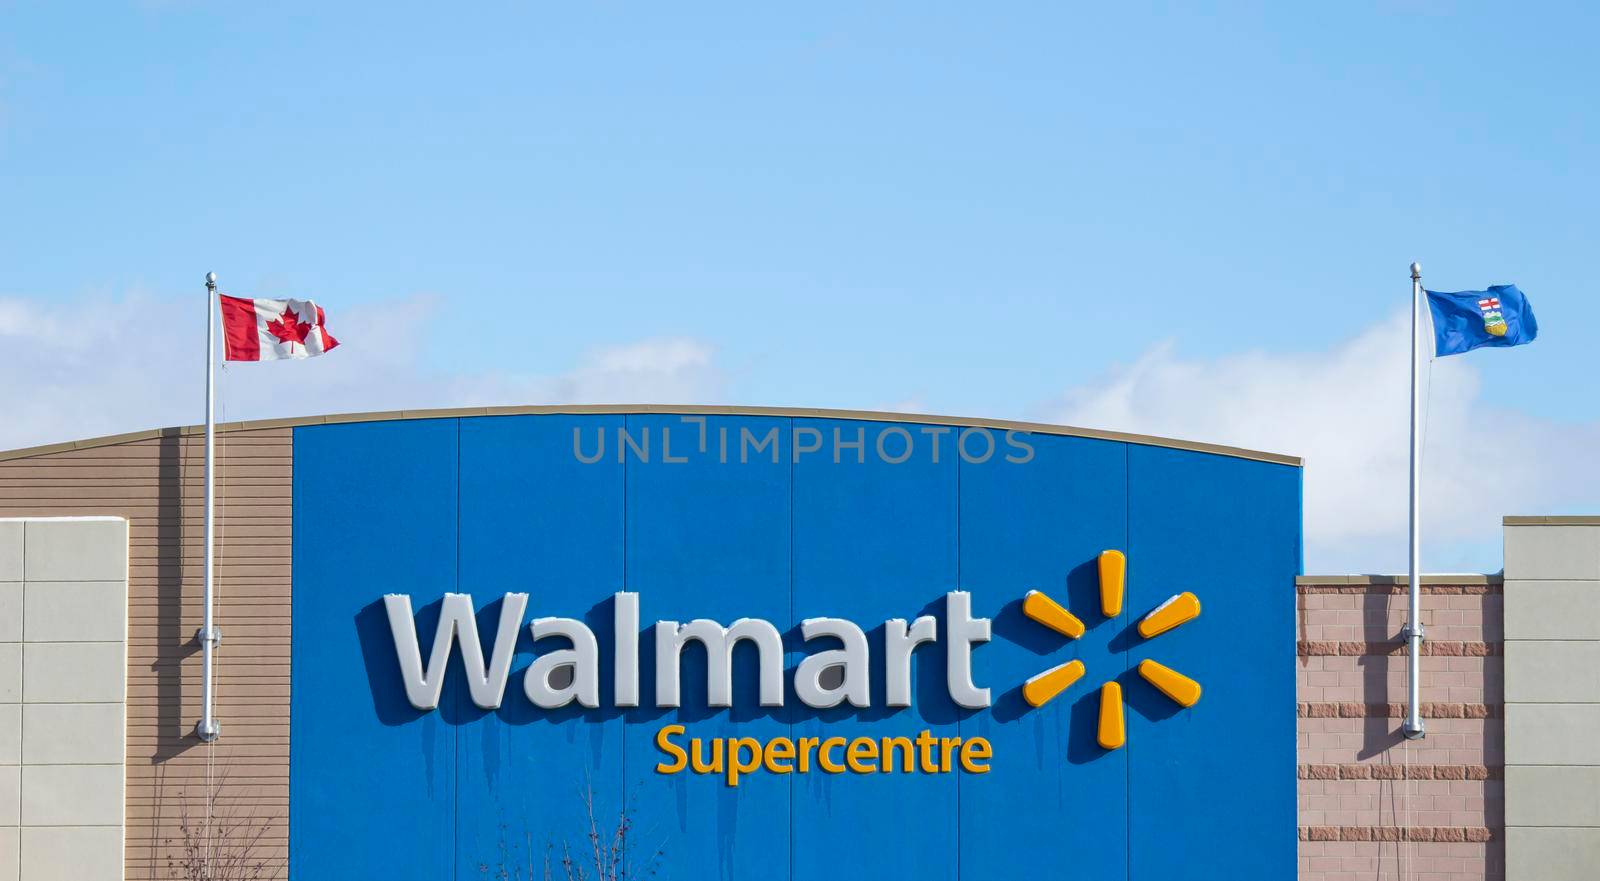 Calgary Alberta, Canada. Oct 17, 2020. Walmart an American multinational retail that operates a chain of hypermarkets, discount department stores, and grocery stores, from in Bentonville, Arkansas. by oasisamuel